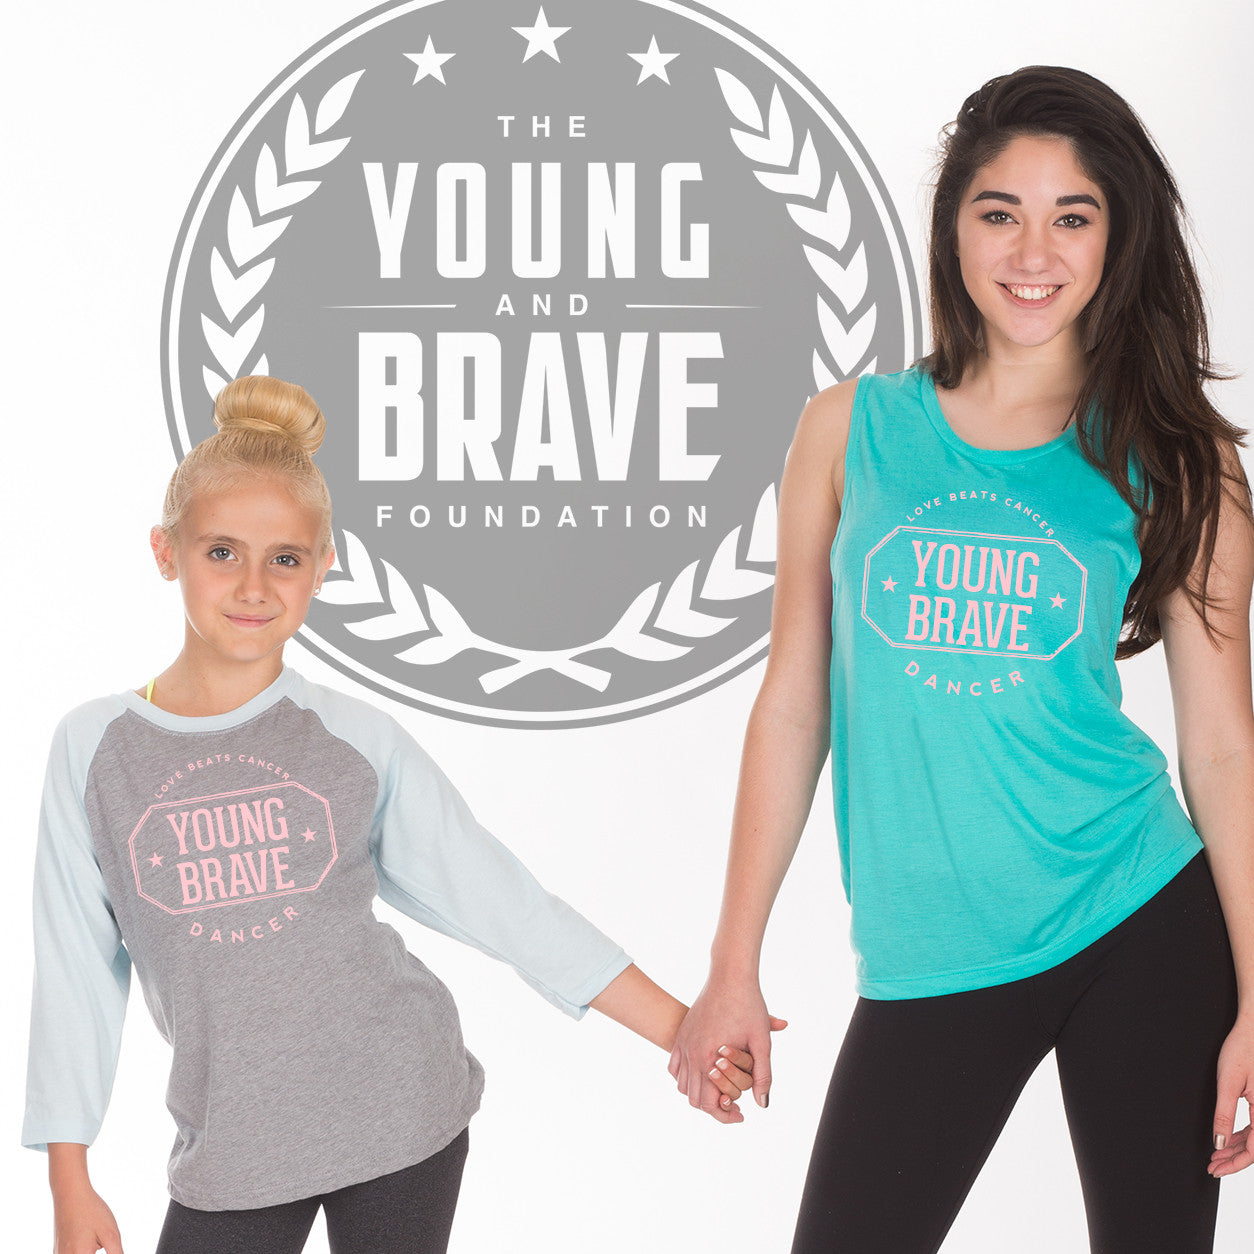 Young Brave Dancer Tees to Benefit Youths with Cancer